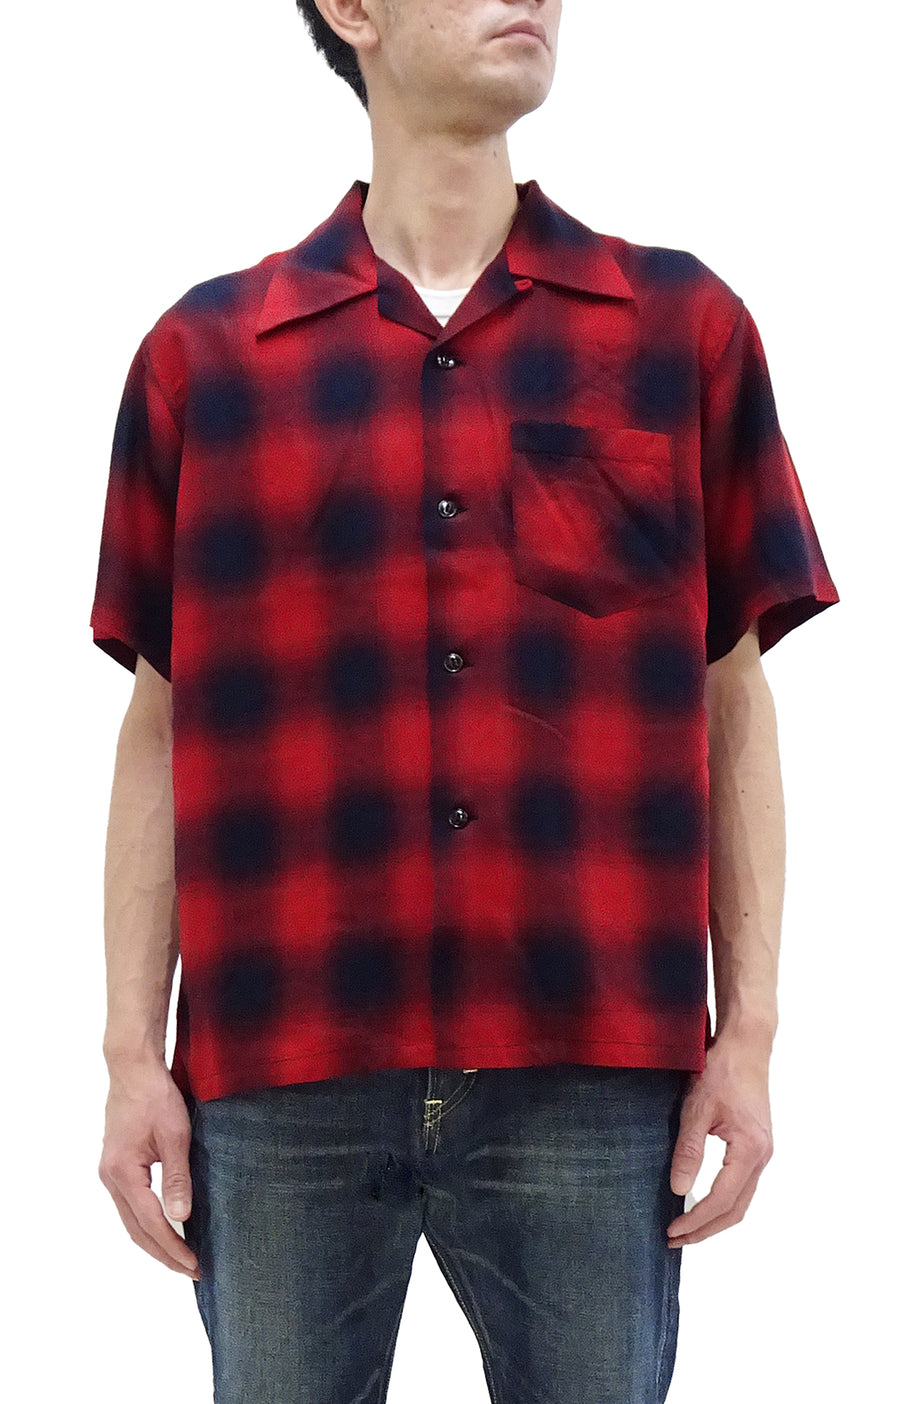 Sugar Cane Rayon Ombre Plaid Shirt Men's Oversized Fit Resort Collar Short Sleeve Casual Button Up Shirt SC39297 165 Red/Navy